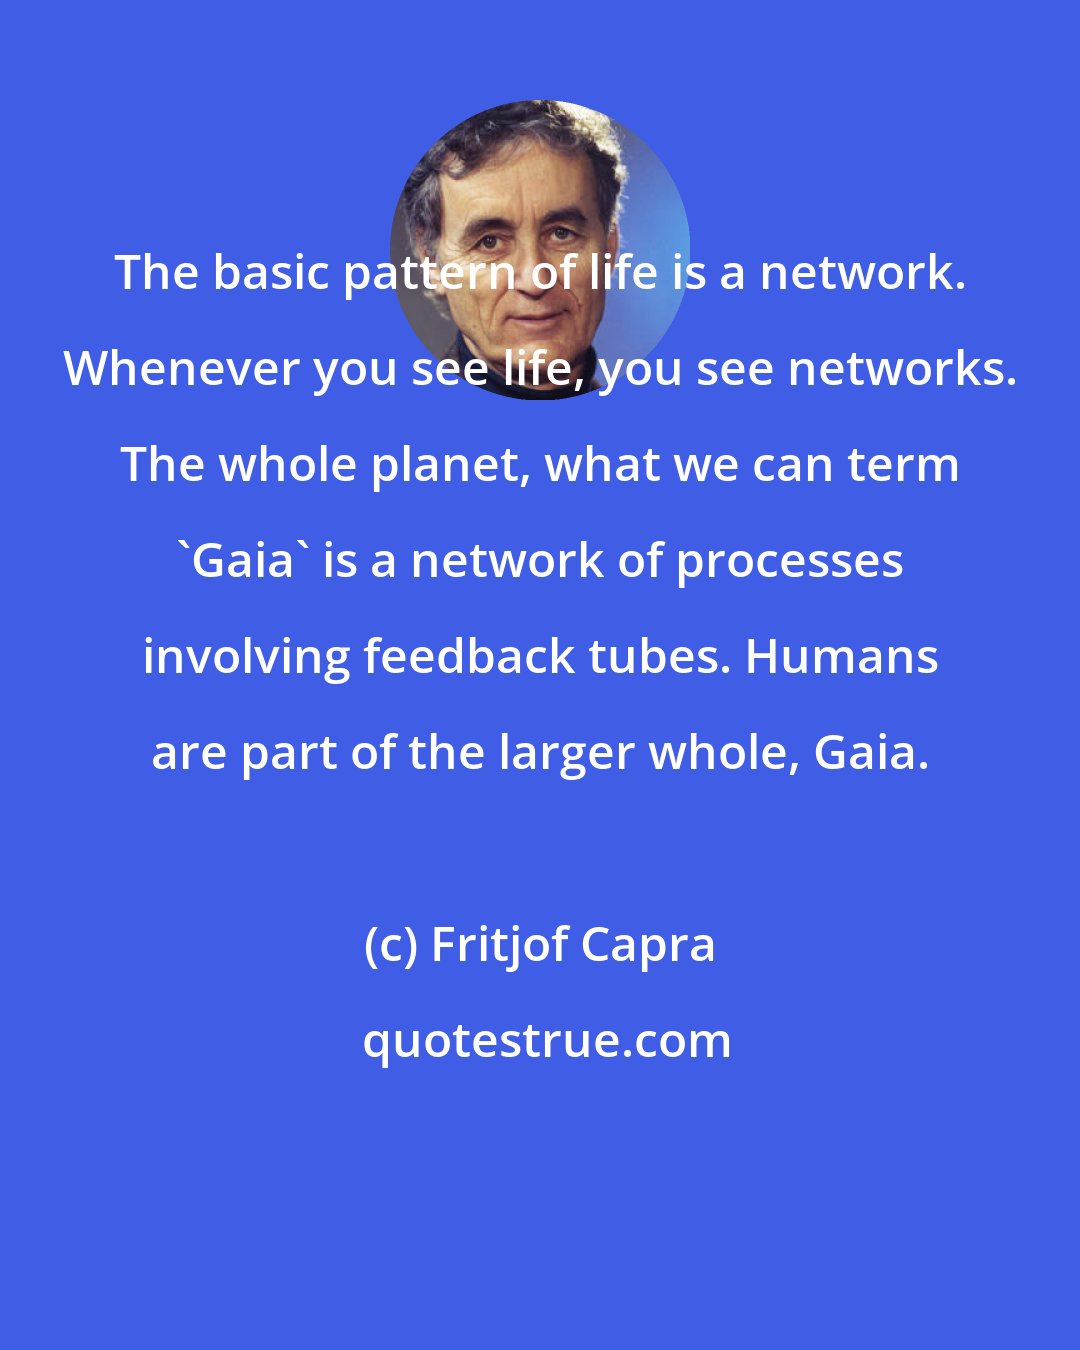 Fritjof Capra: The basic pattern of life is a network. Whenever you see life, you see networks. The whole planet, what we can term 'Gaia' is a network of processes involving feedback tubes. Humans are part of the larger whole, Gaia.